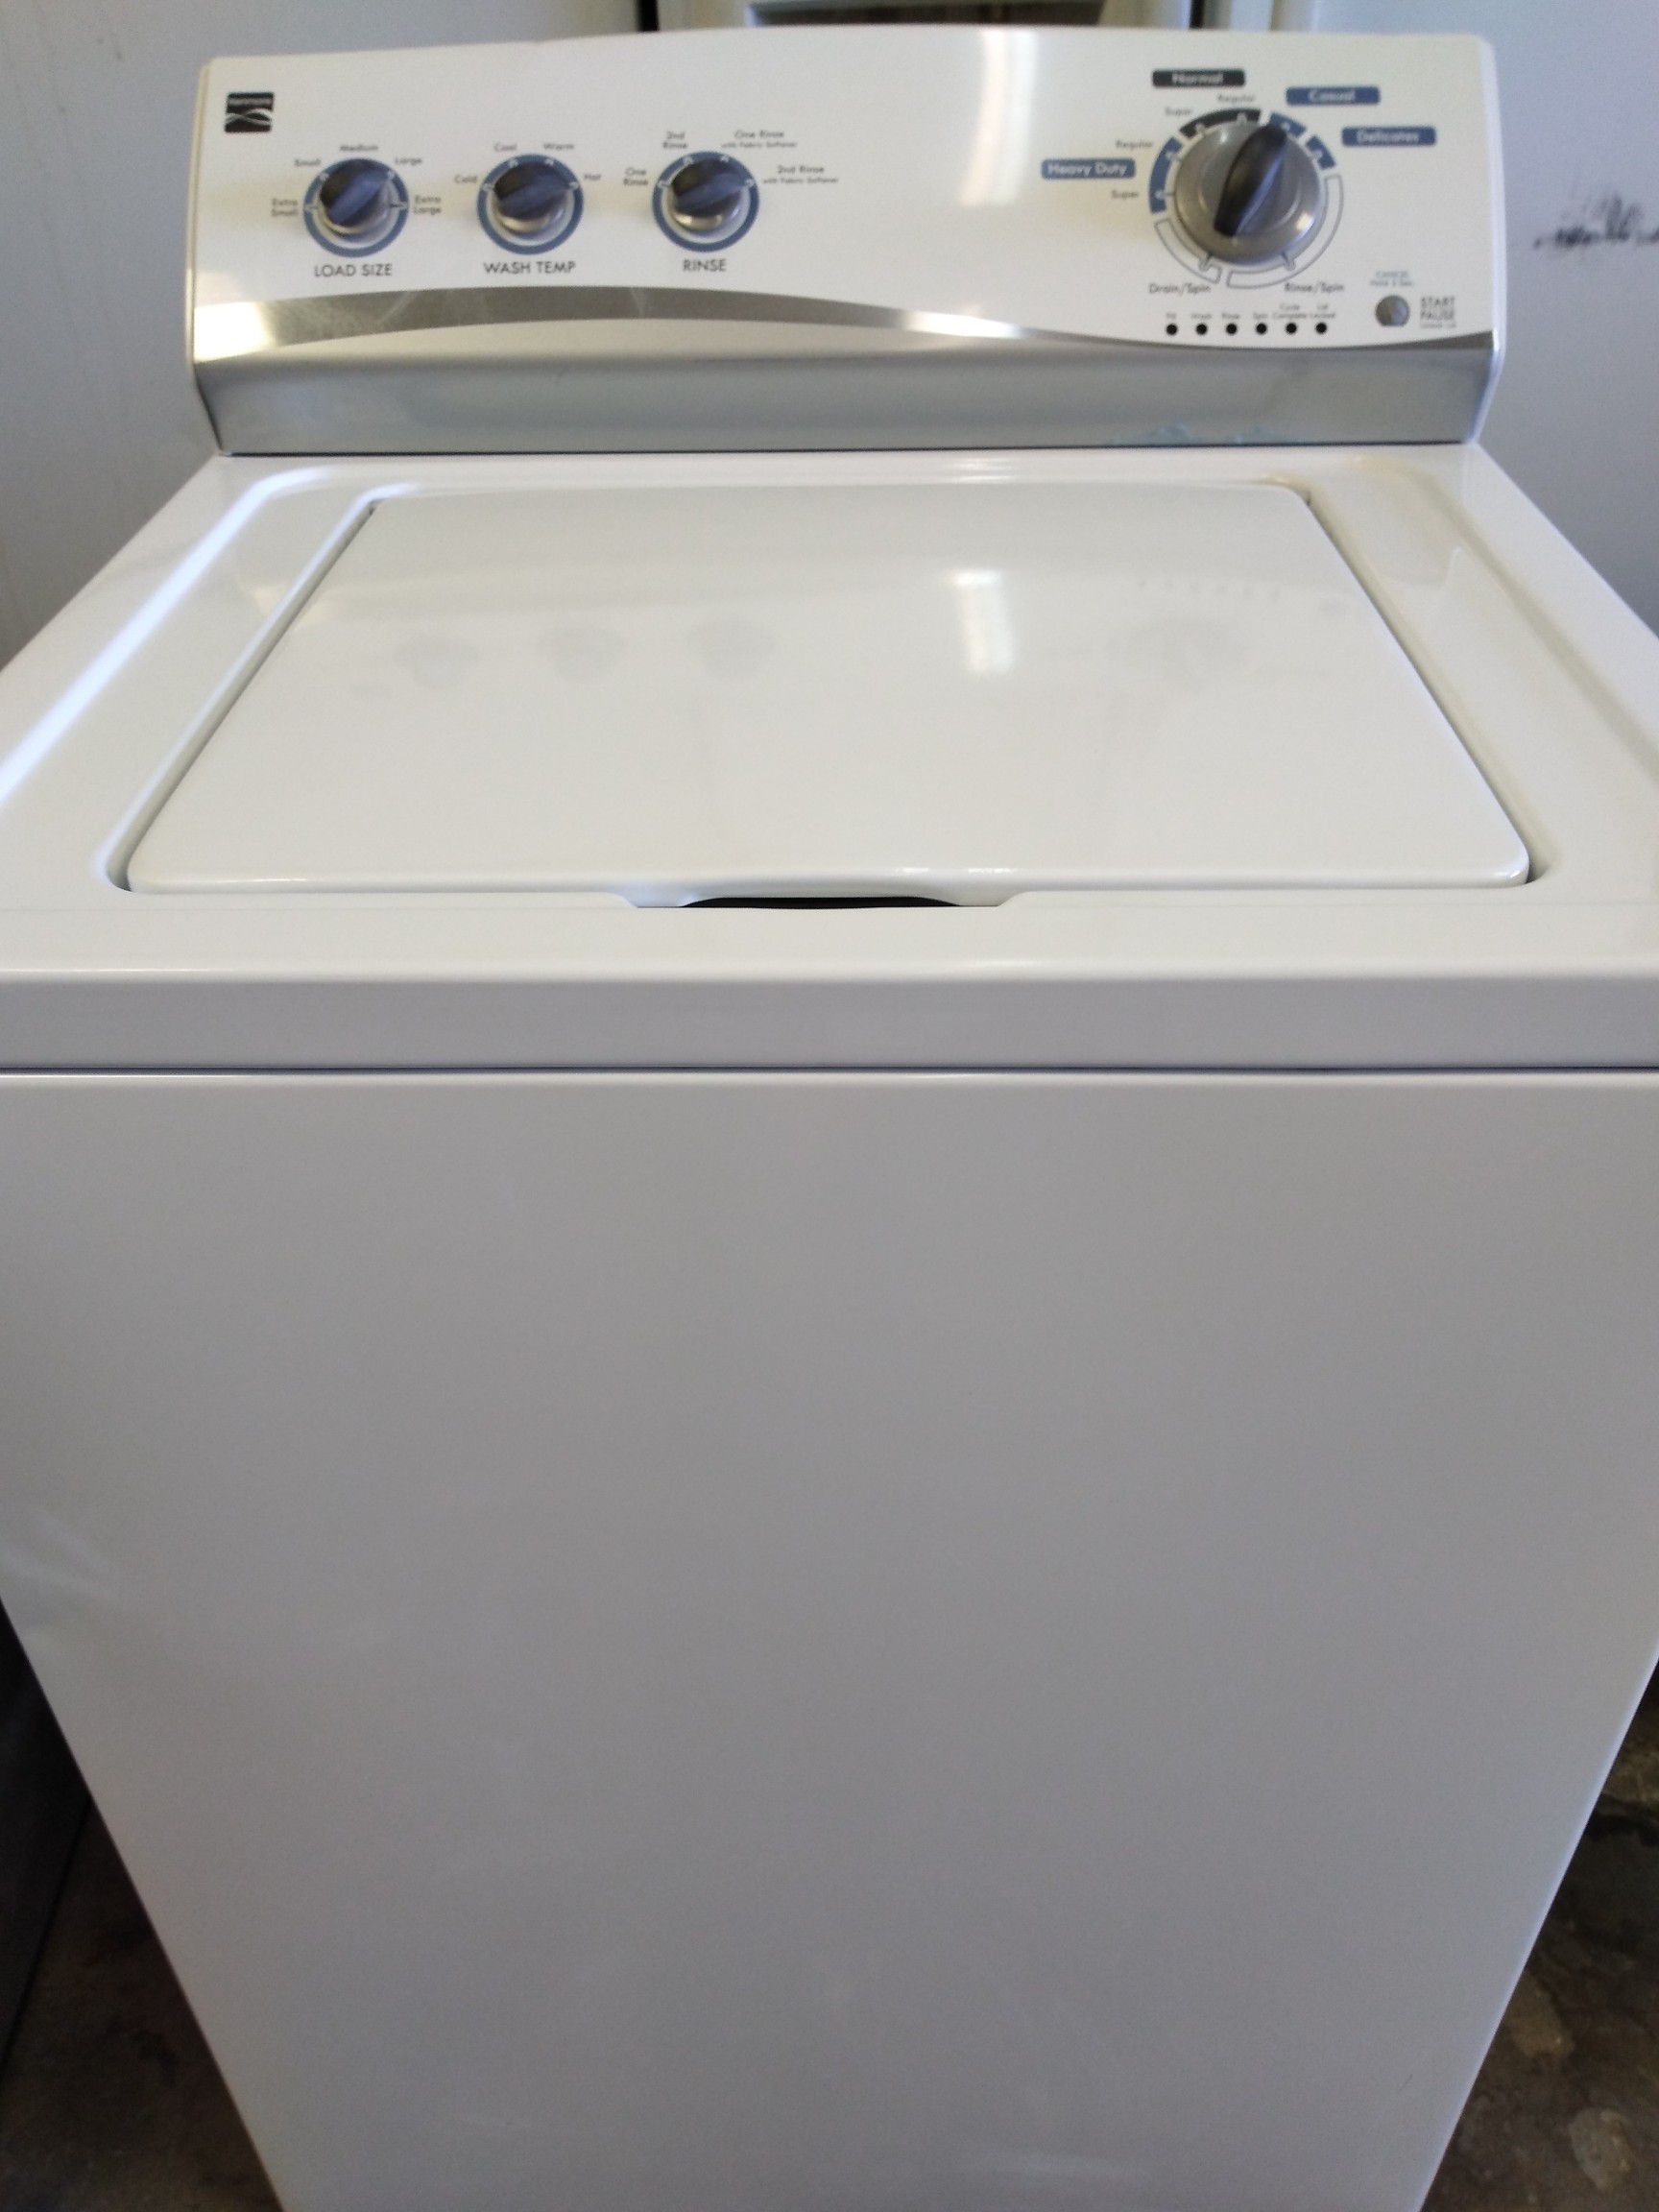 Kenmore Washer $160 With Warranty